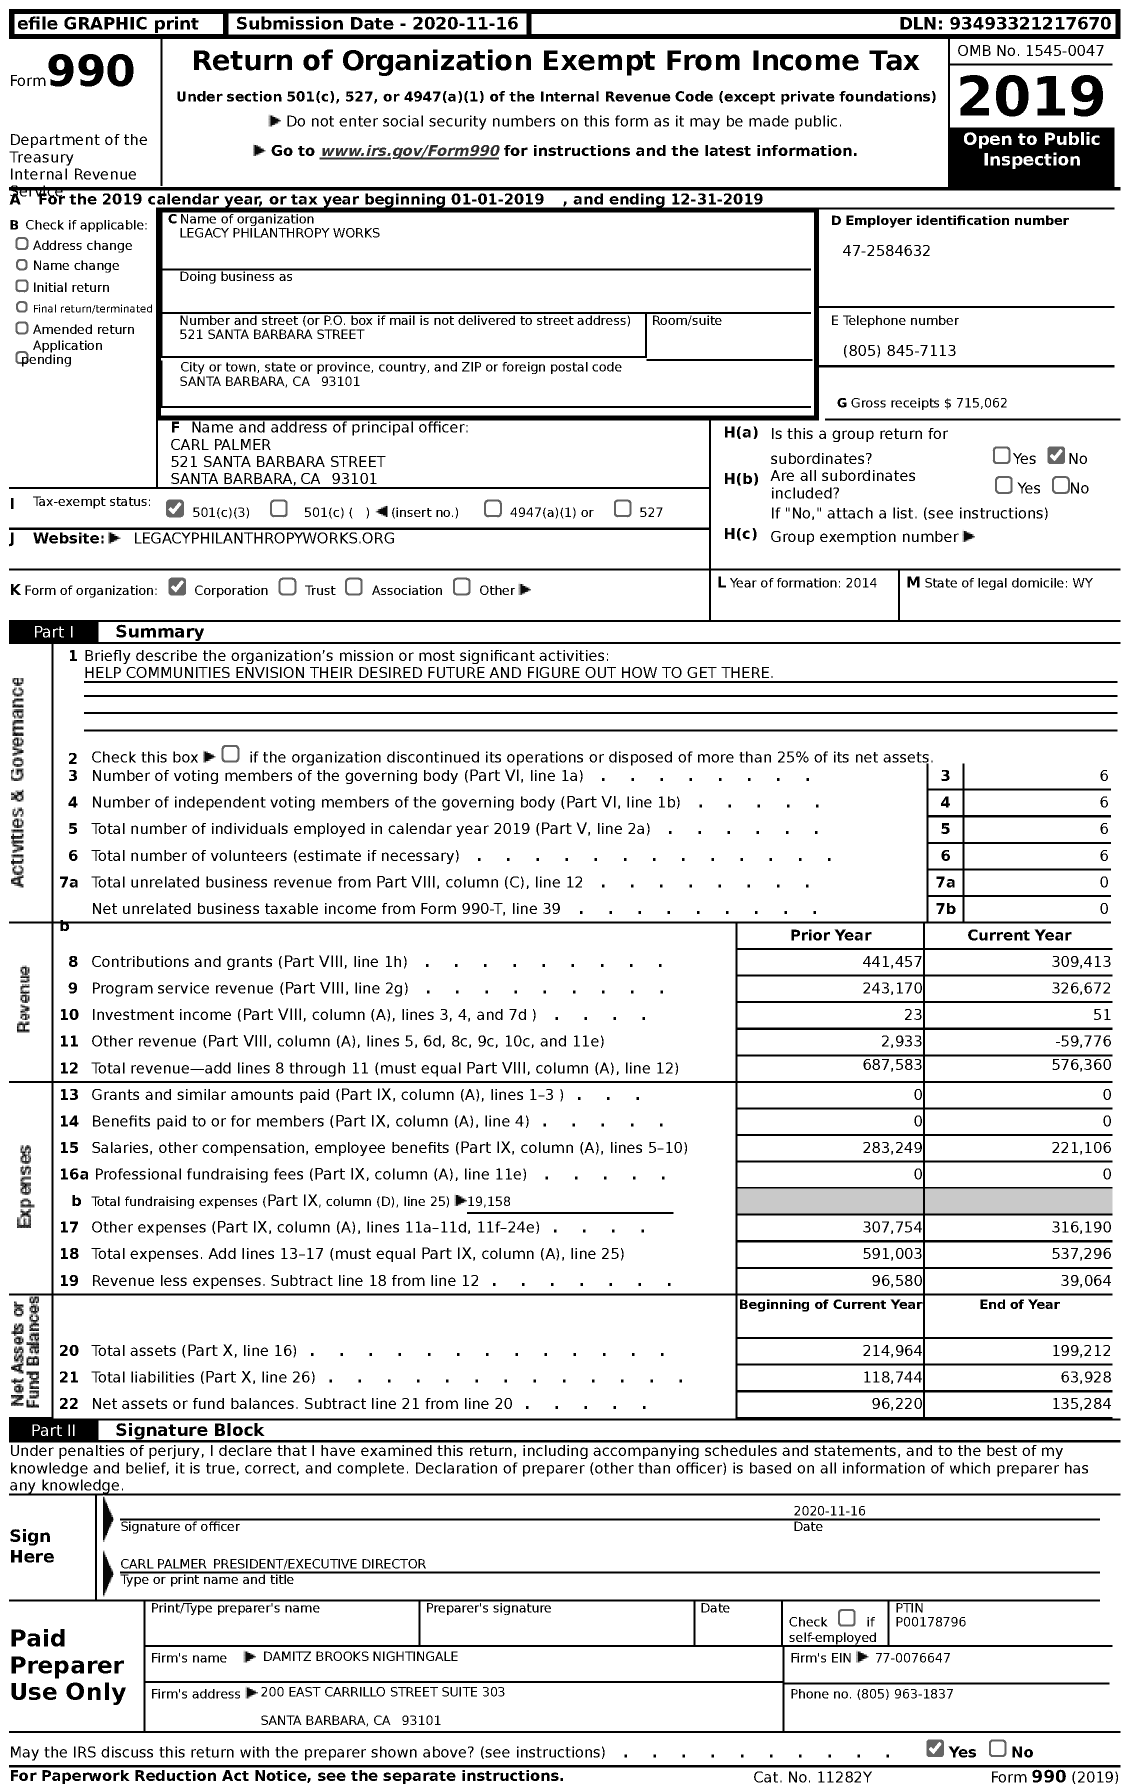 Image of first page of 2019 Form 990 for Legacy Philanthropy Works